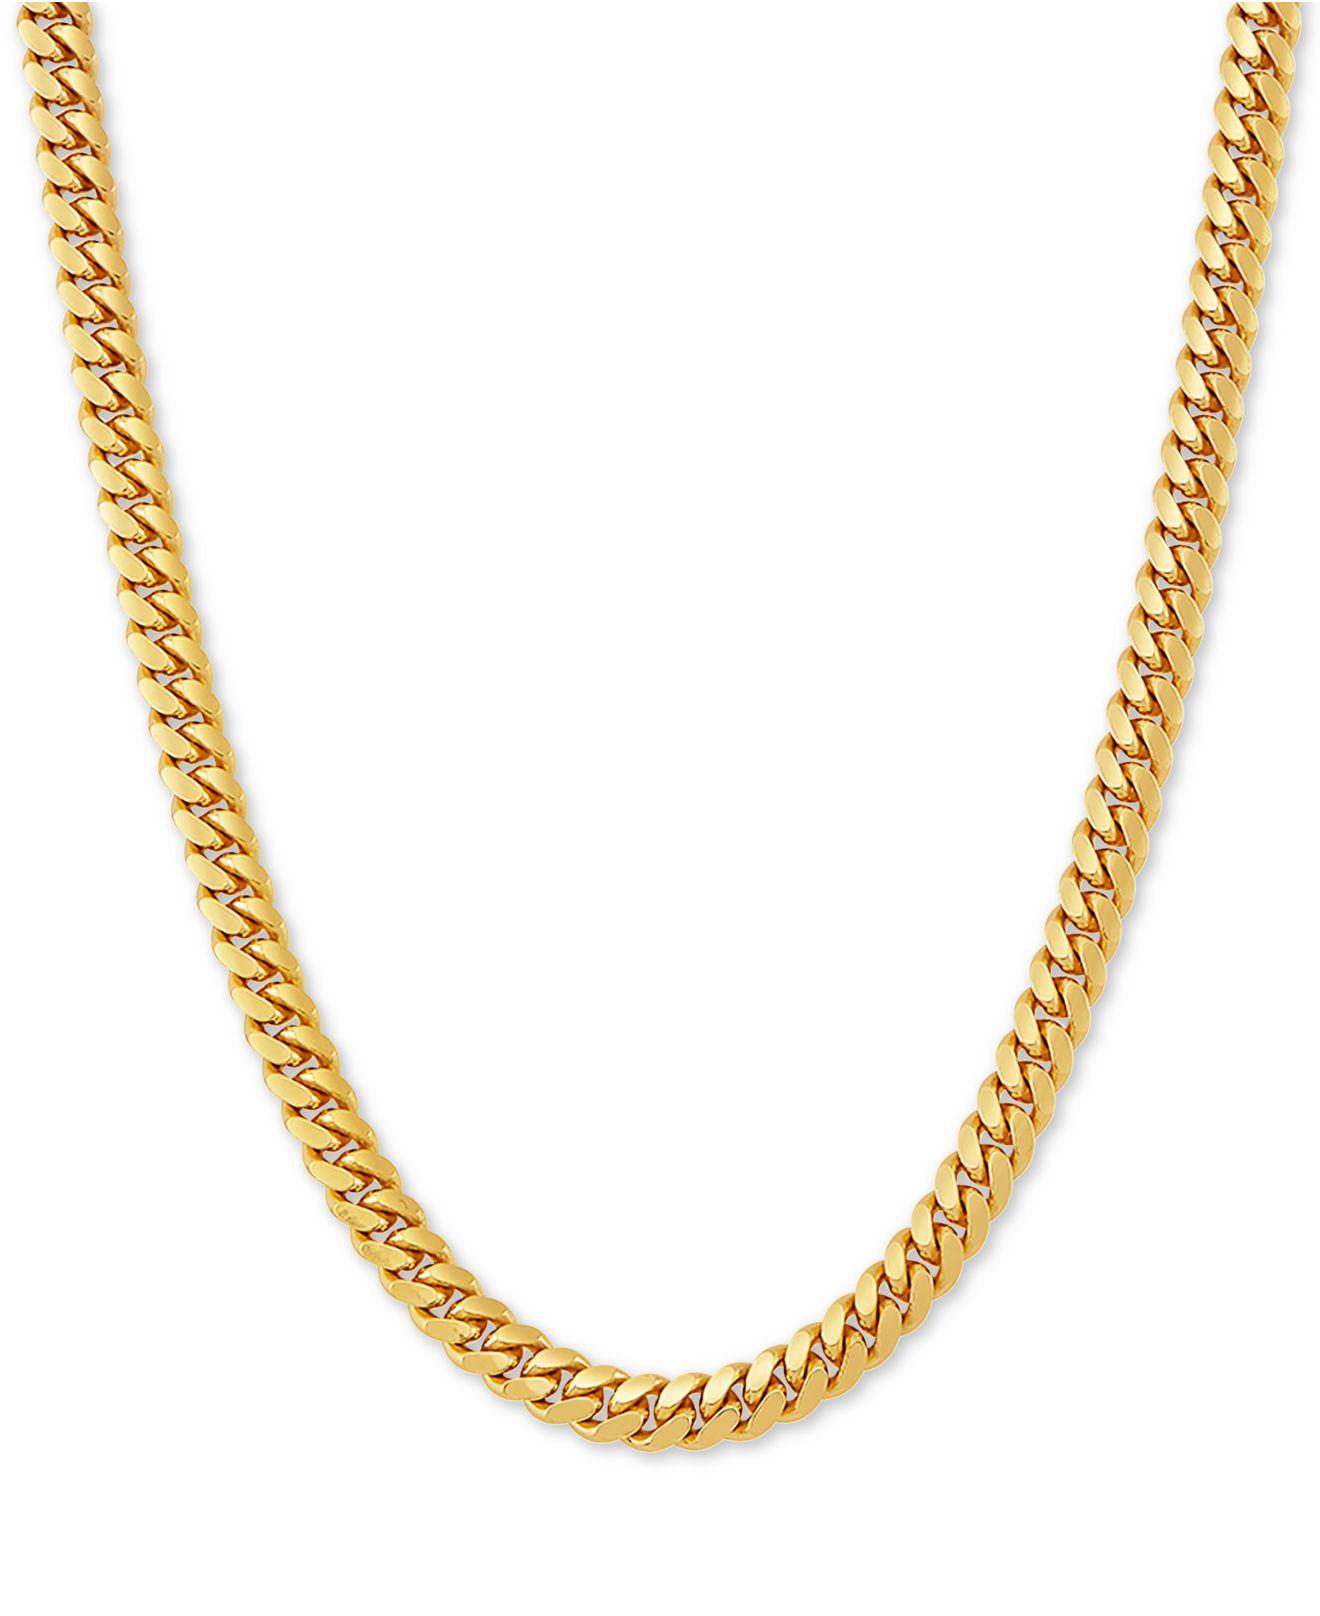 WOMENS MENS 18K GOLD OVER STERLING SILVER 22" CURB LINK NECKLACE CHAIN 